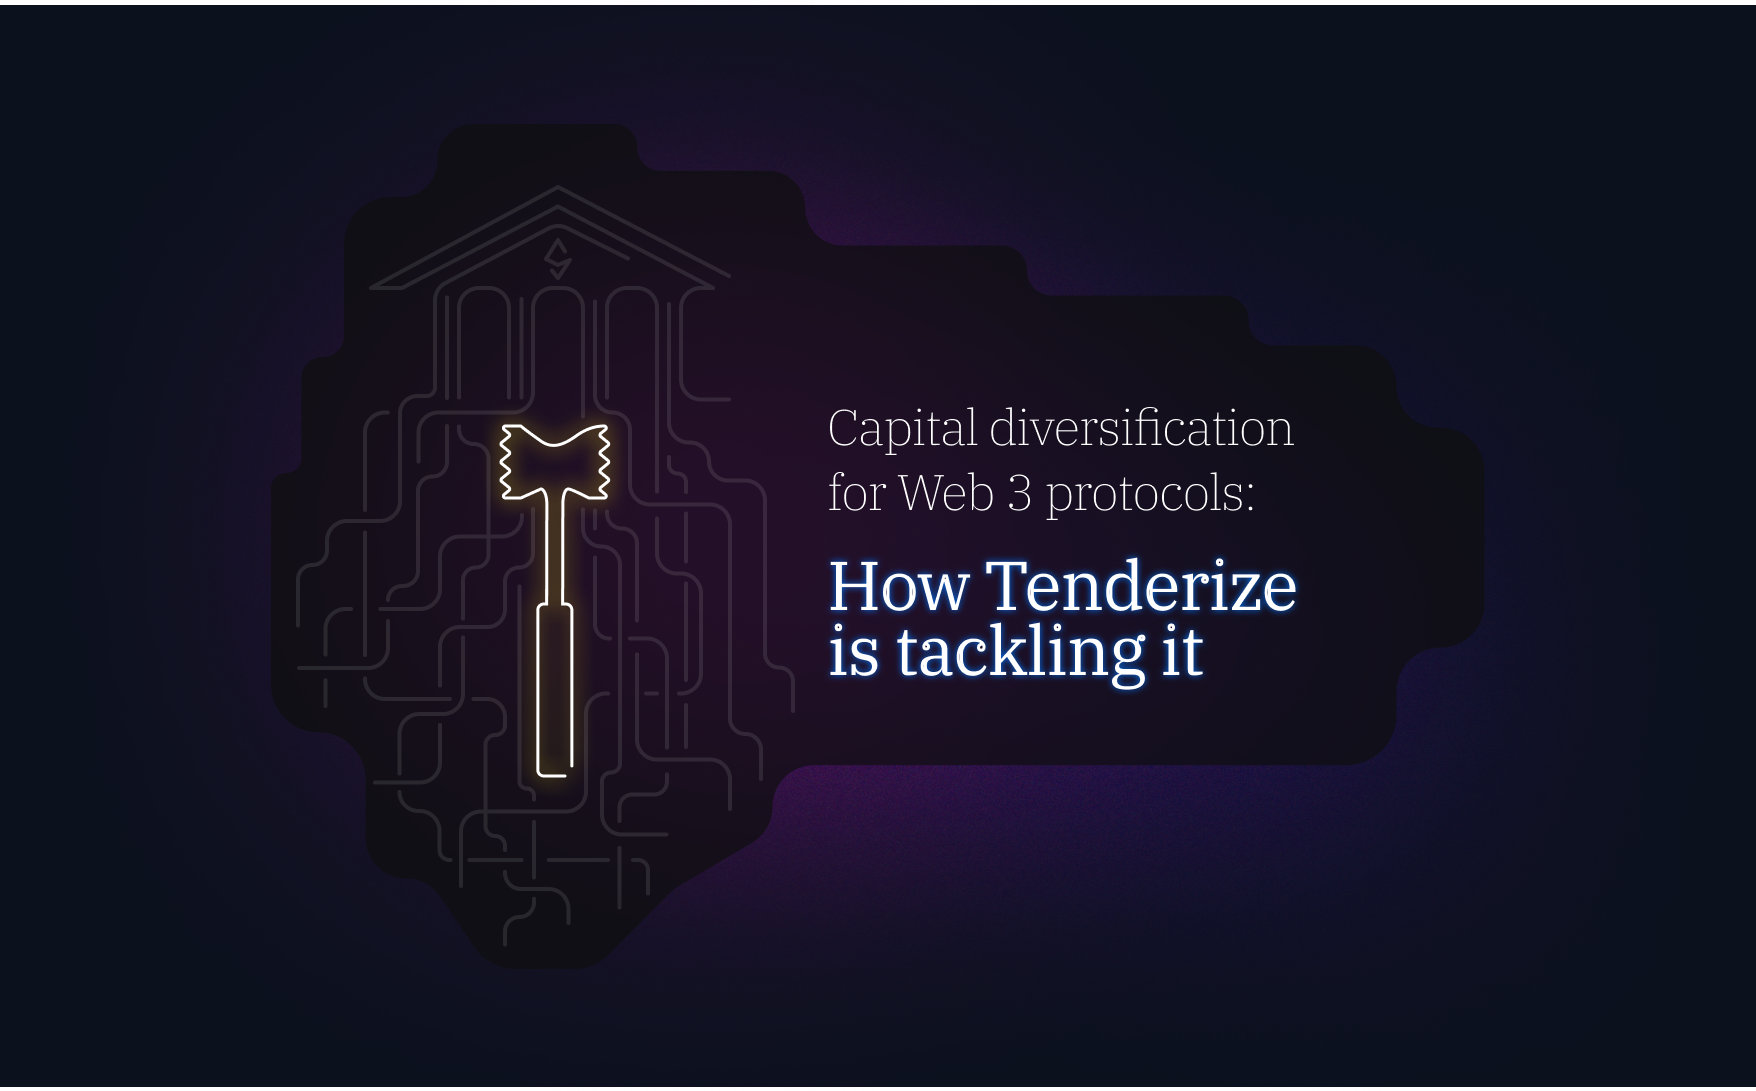 Capital diversification for Web 3 protocols: How Tenderize is tackling it